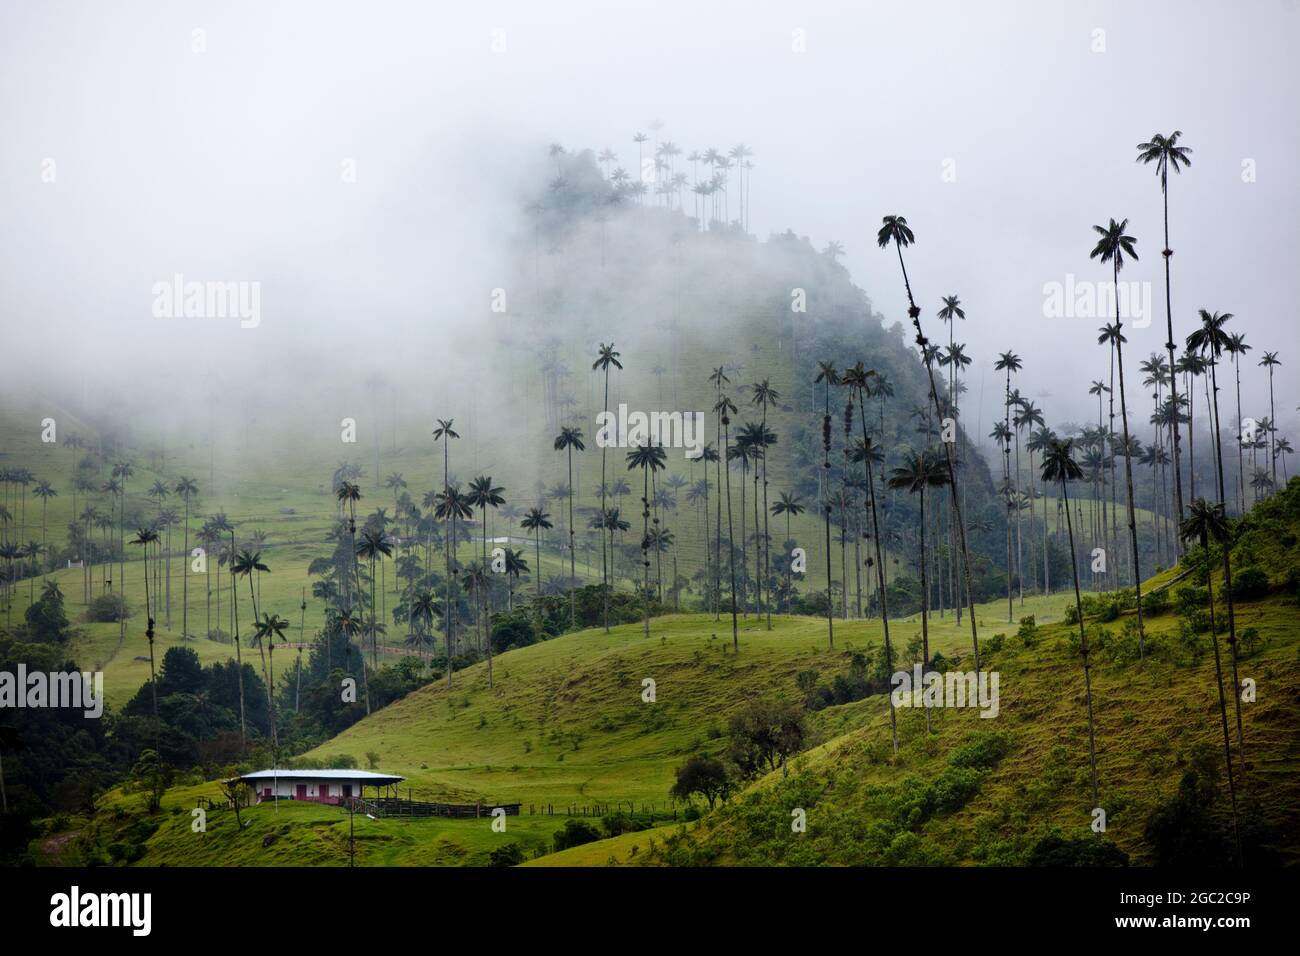 Gigantic wax palm trees shrouded in mists in the Cocora Valley, Colombia. Stock Photo